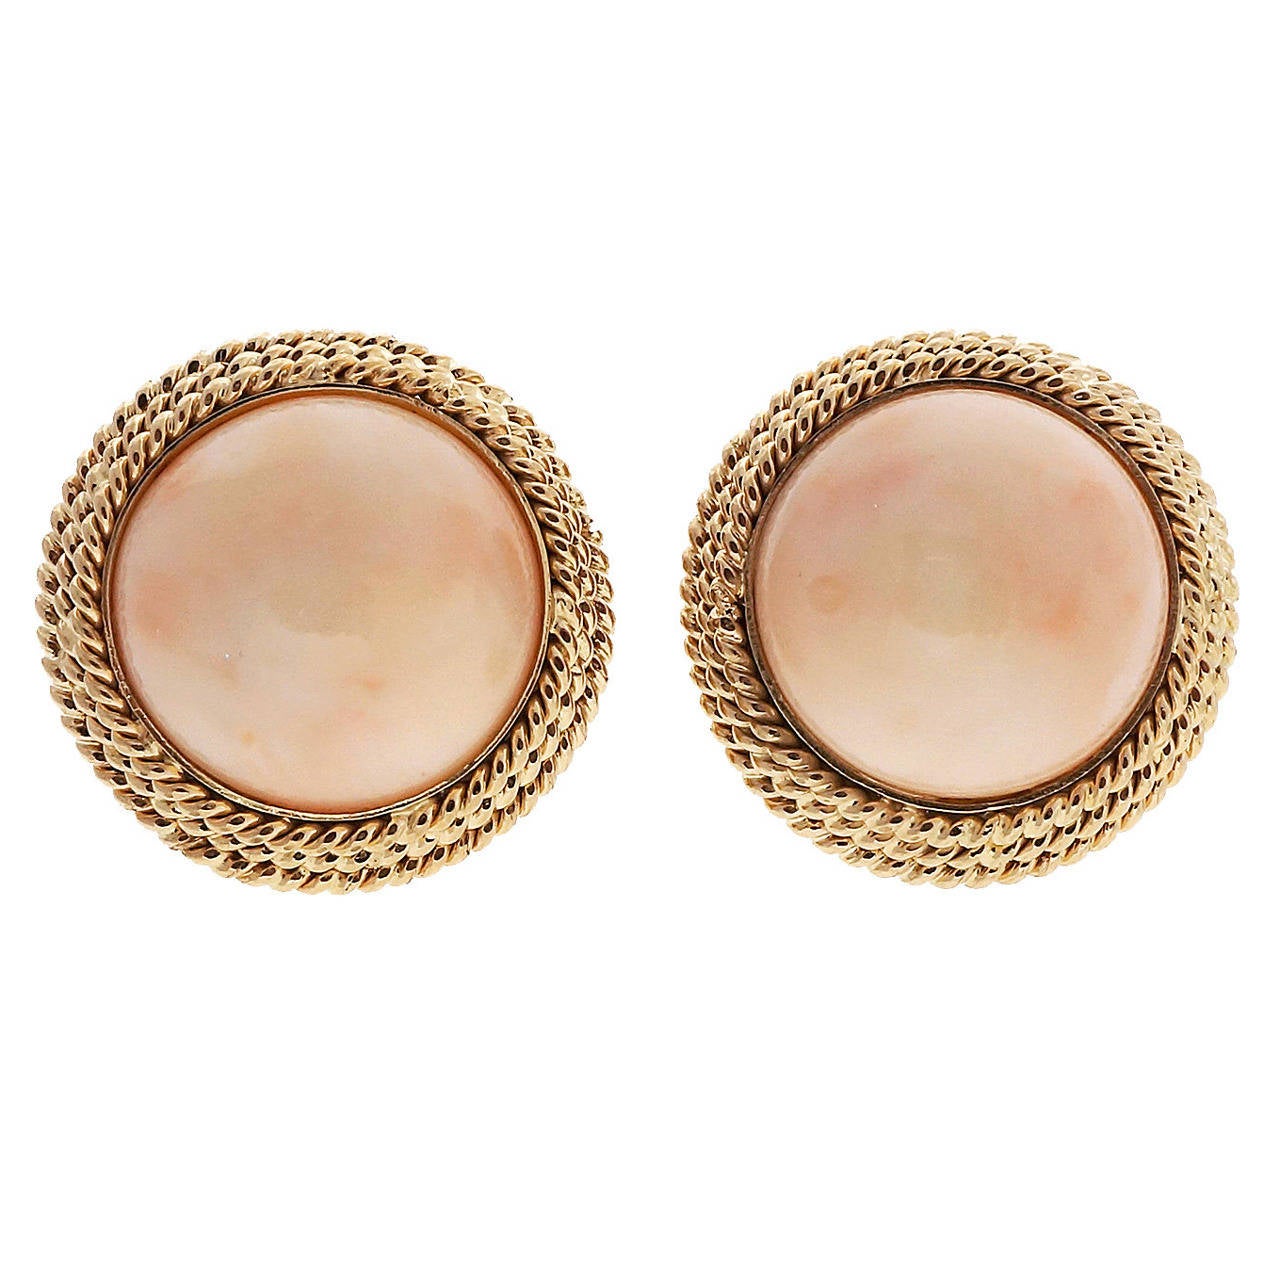 Vintage 1950-1960 well polished light pink natural Coral, not dyed or treated. Handmade 3 row twisted wire frames. Omega clip and post back.

2 natural light pink round Coral, untreated and well-polished, 17.3mm
14k Yellow gold
18.9 grams
Tested: